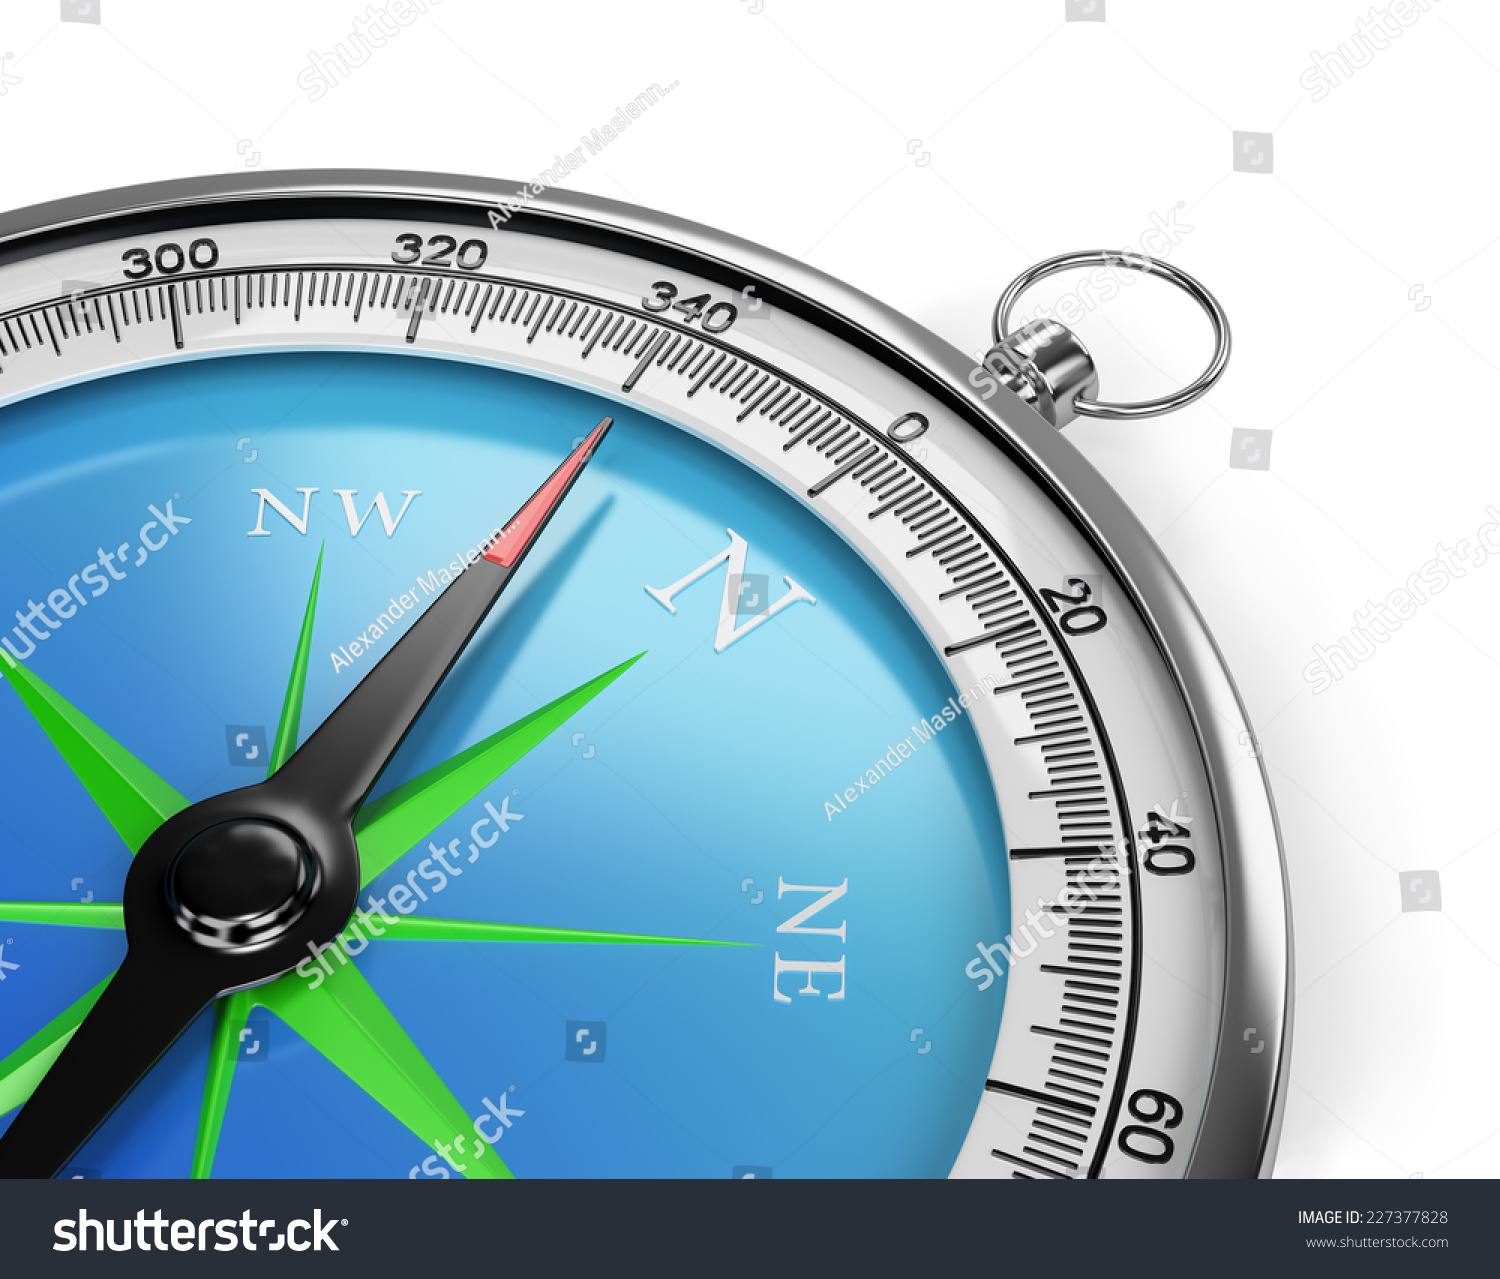 how does a compass indicate direction